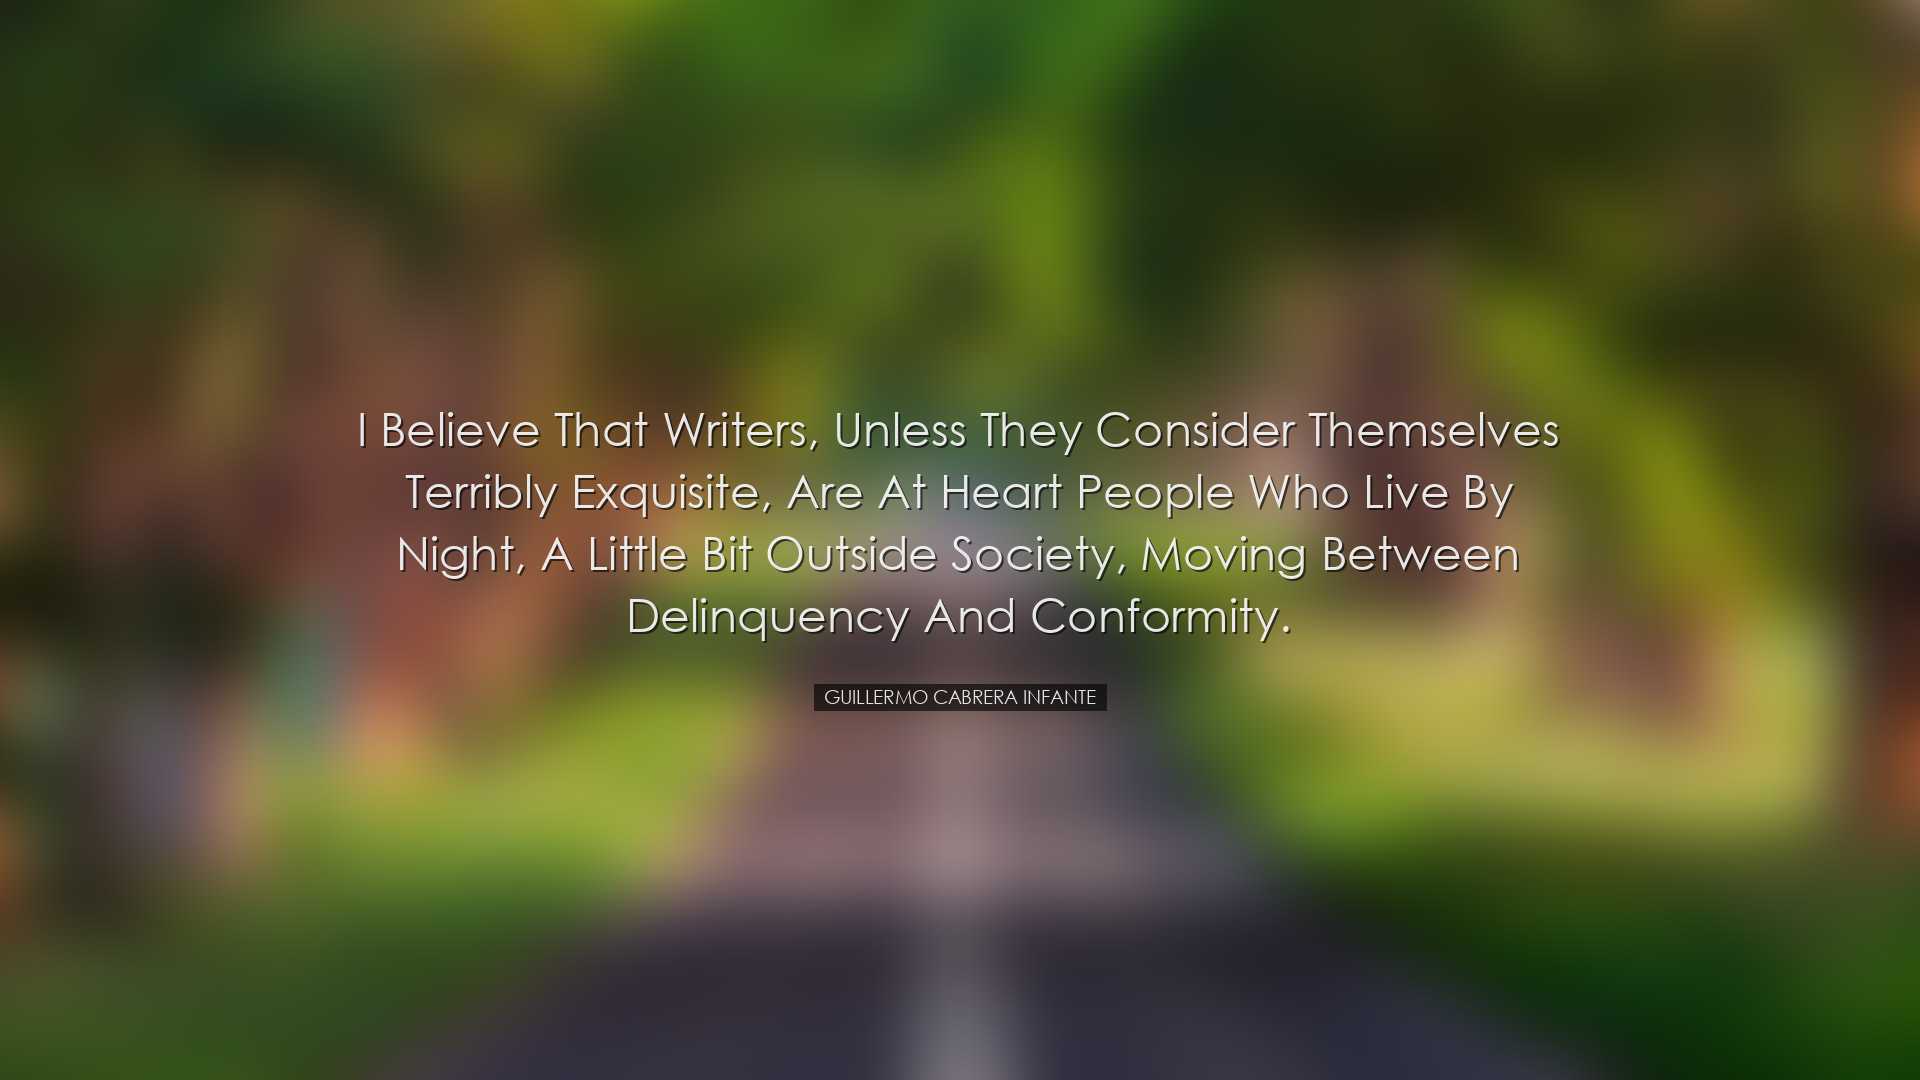 I believe that writers, unless they consider themselves terribly e